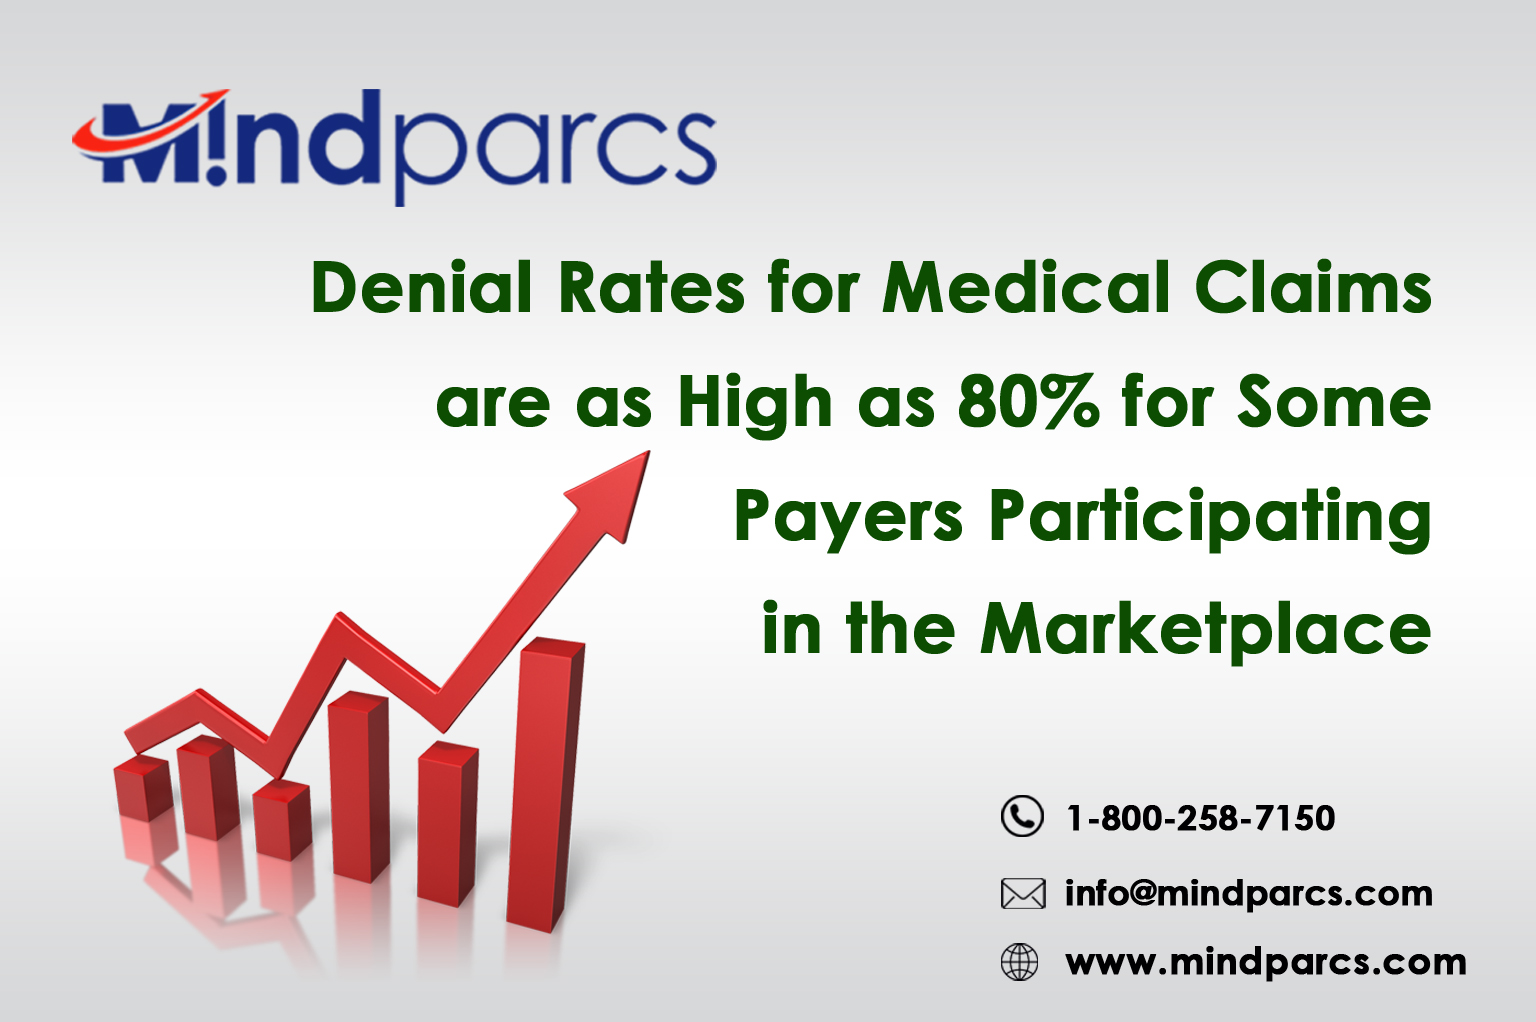 Denial Rates for Medical Claims are as High as 80% for Some Payers Participating in the Marketplace